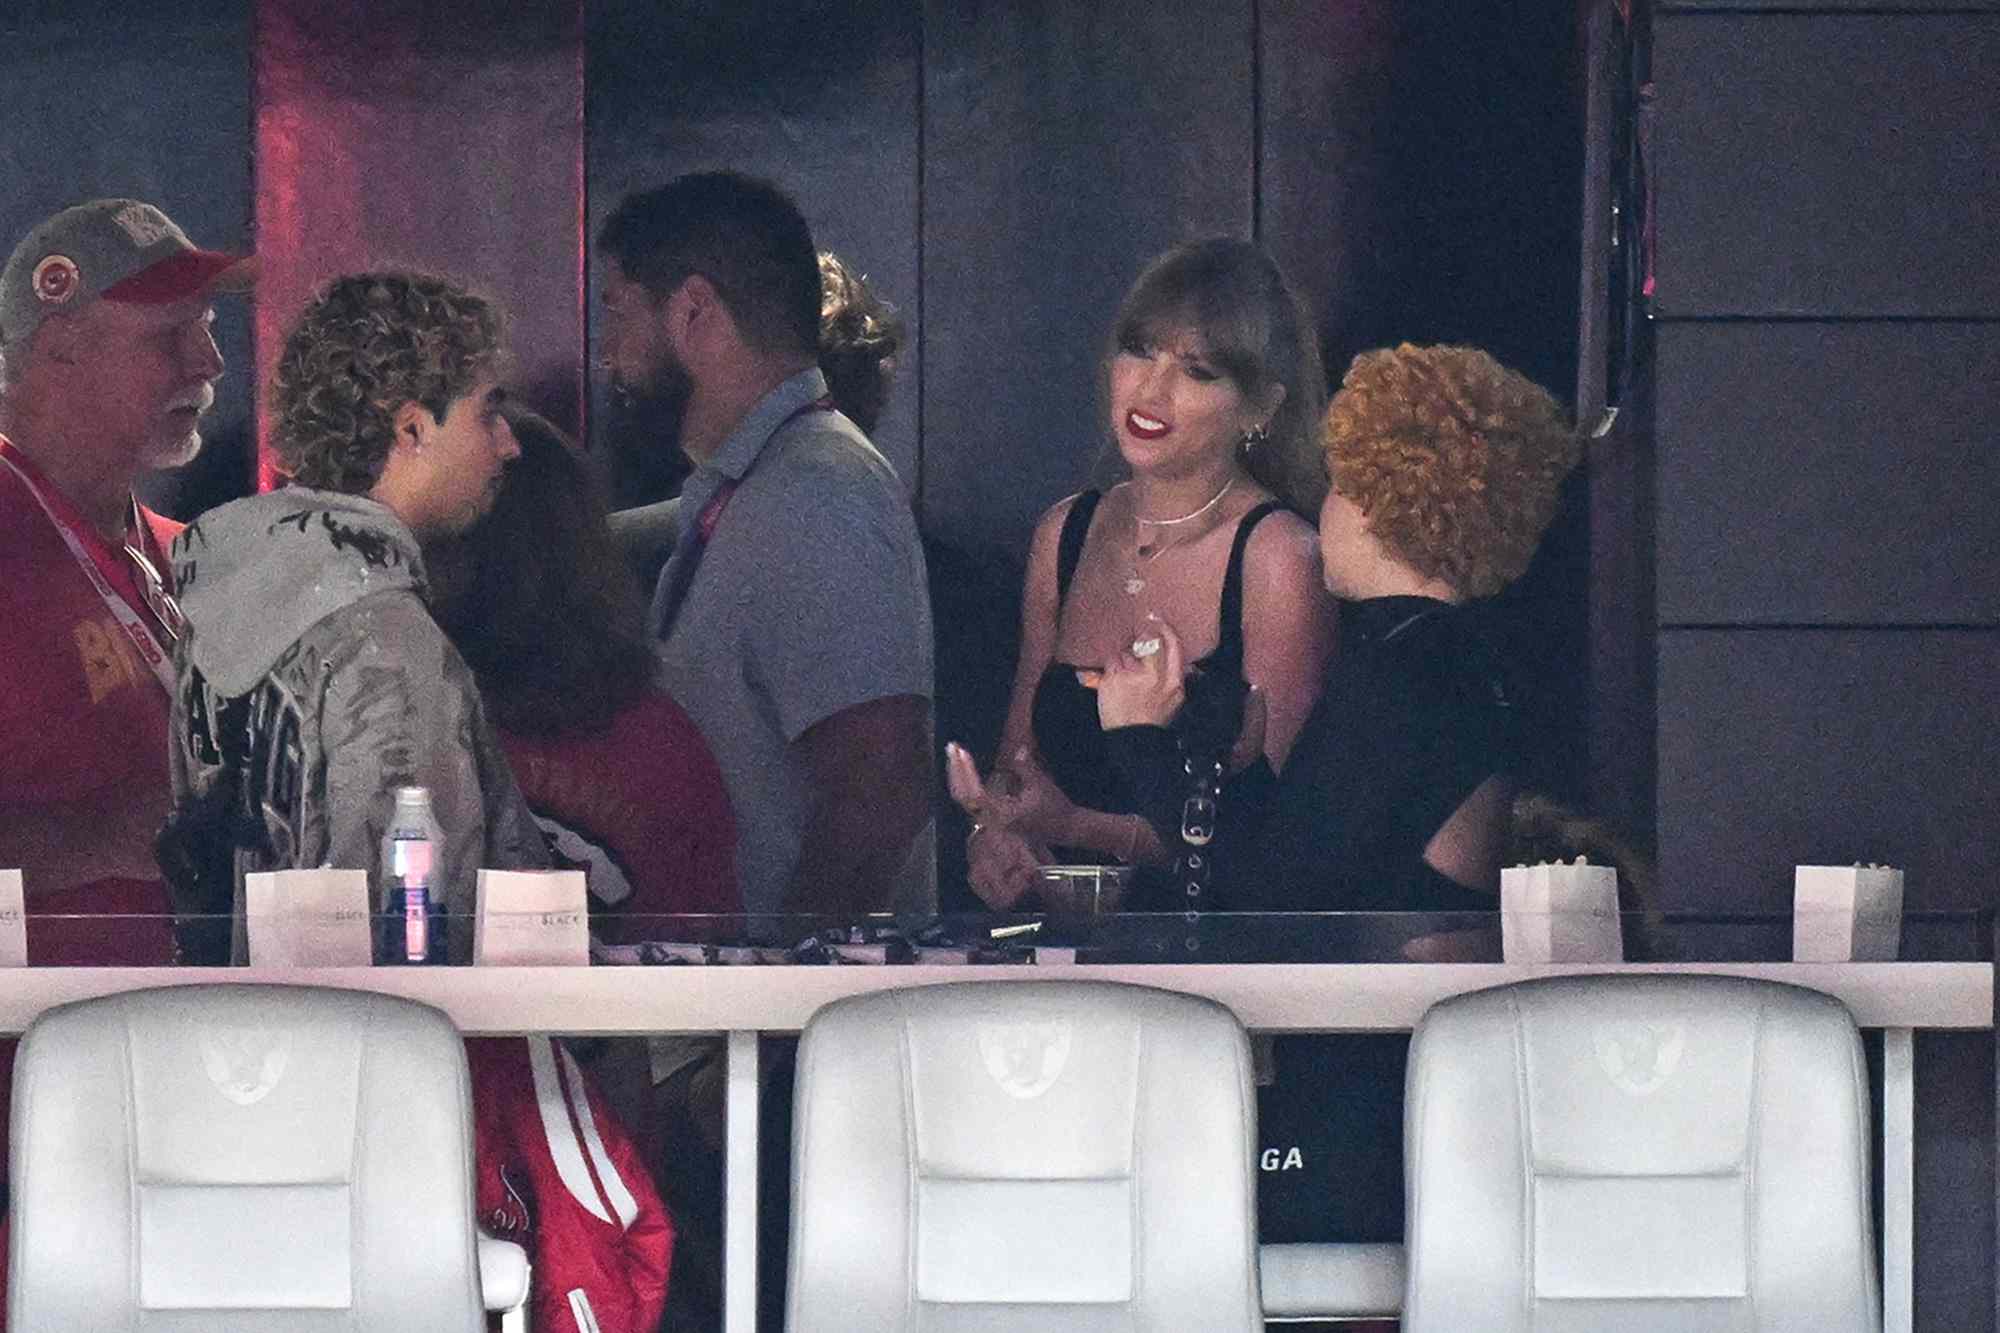 Taylor Swift and Ice Spice (right) attend Super Bowl LVIII between the San Francisco 49ers and the Kansas City Chiefs held at Allegiant Stadium in Las Vegas, Nevada on February 11, 2024